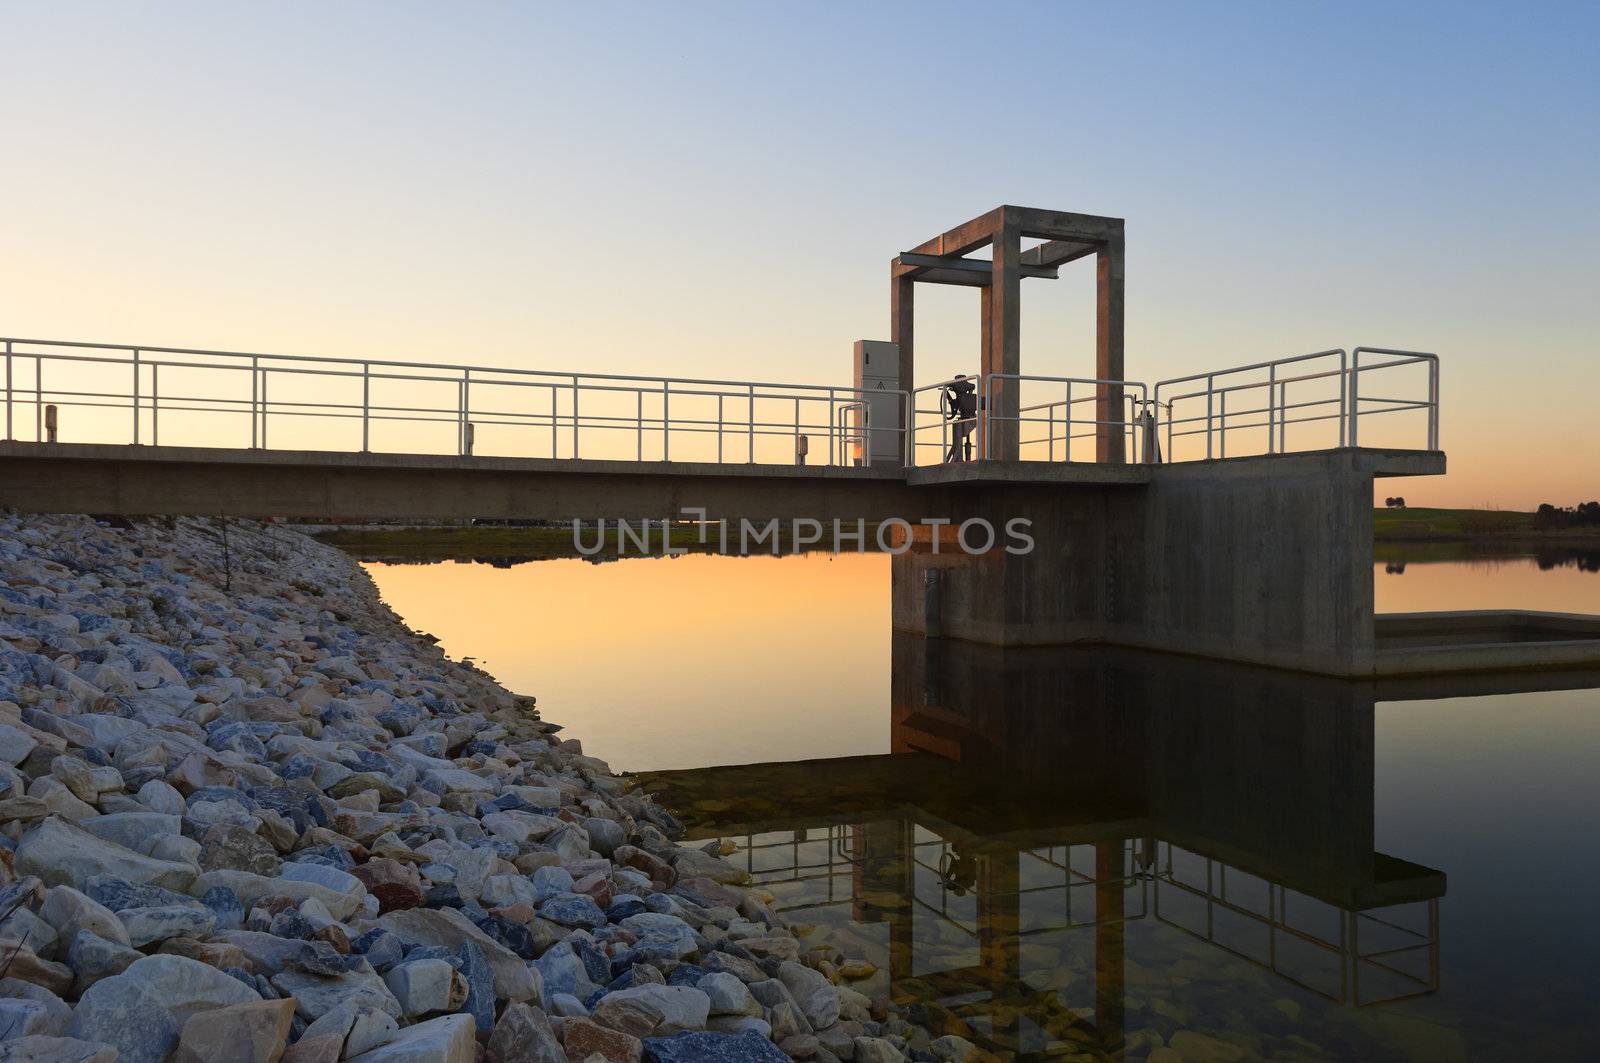 Outlet tower in a small irrigation dam, part of the Alqueva Irrigation Plan, Alentejo, Portugal